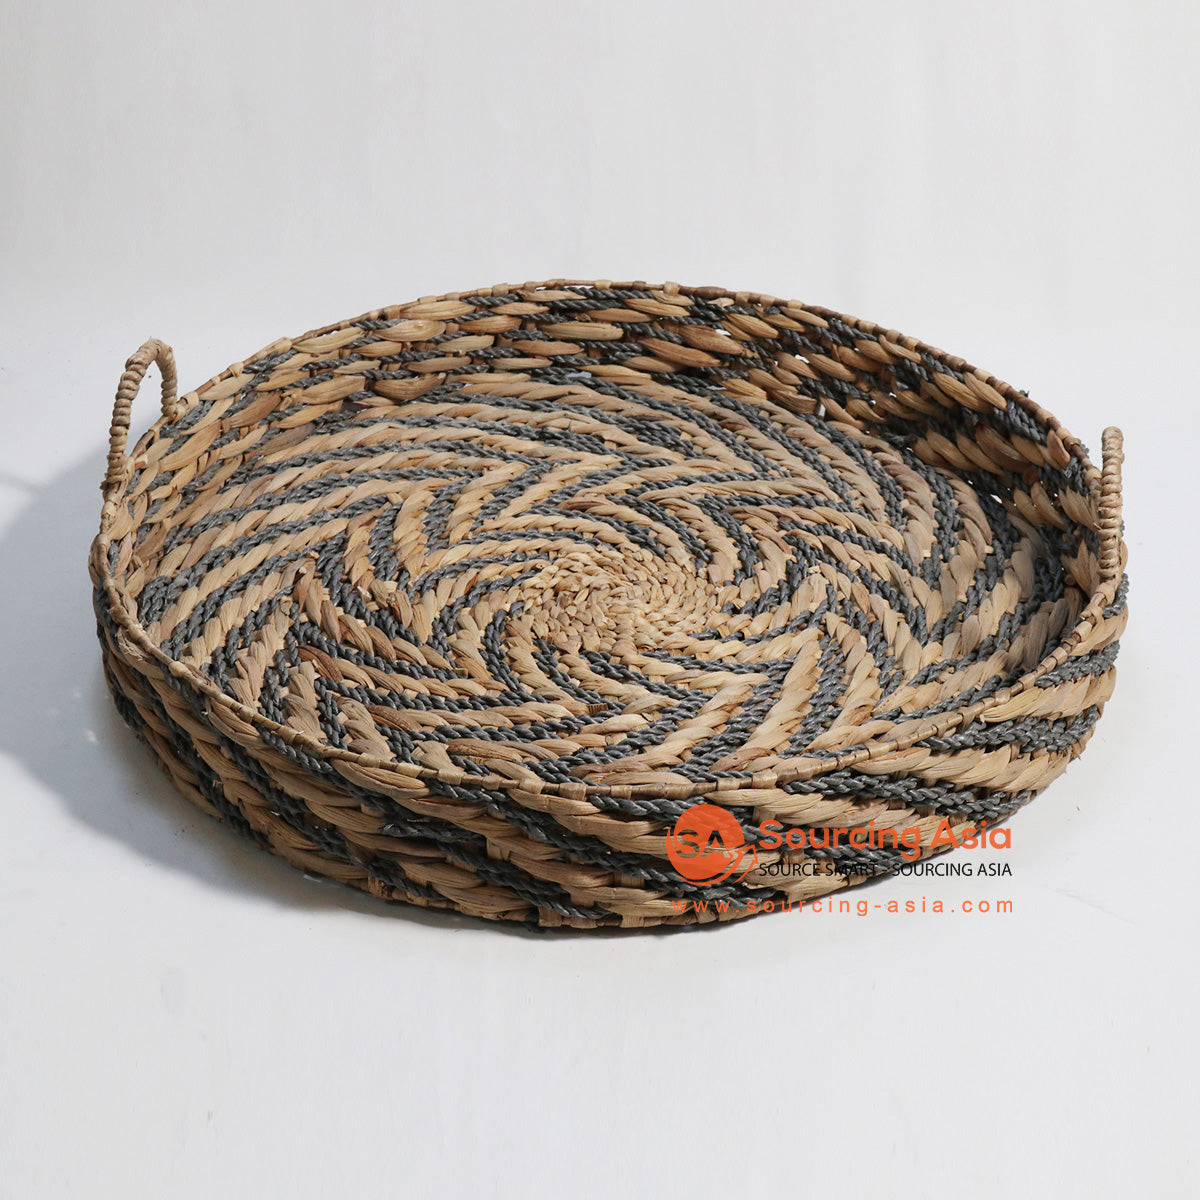 HBSC140 NATURAL AND BLACK WOVEN WATER HYACINTH ROUND TRAY WITH HANDLE